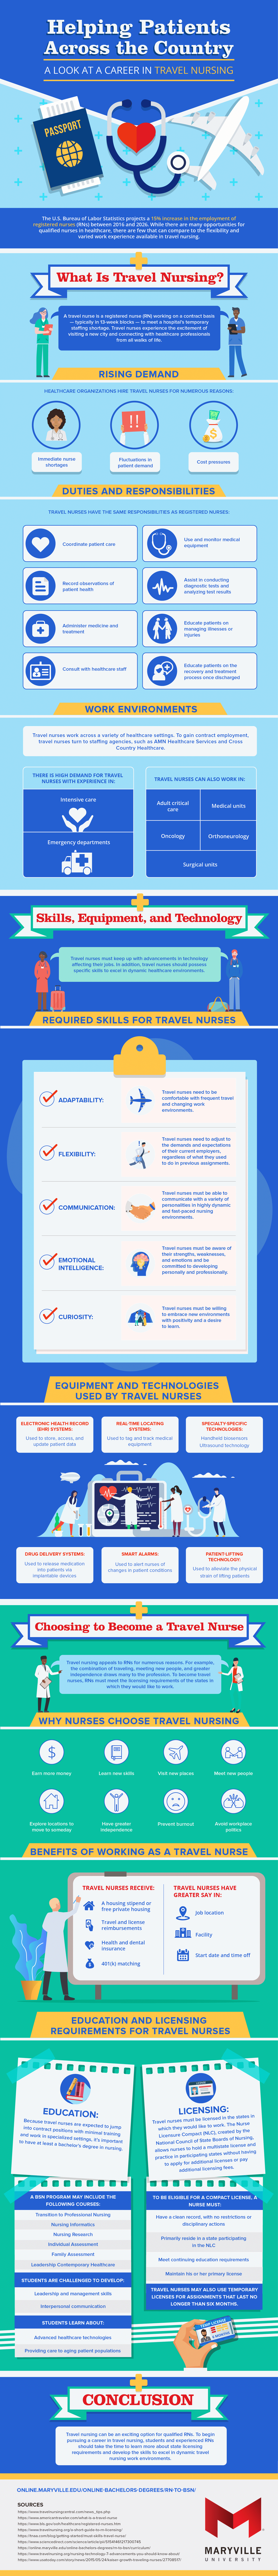 How becoming a travel nurse can lead to an exciting profession with unique benefits.